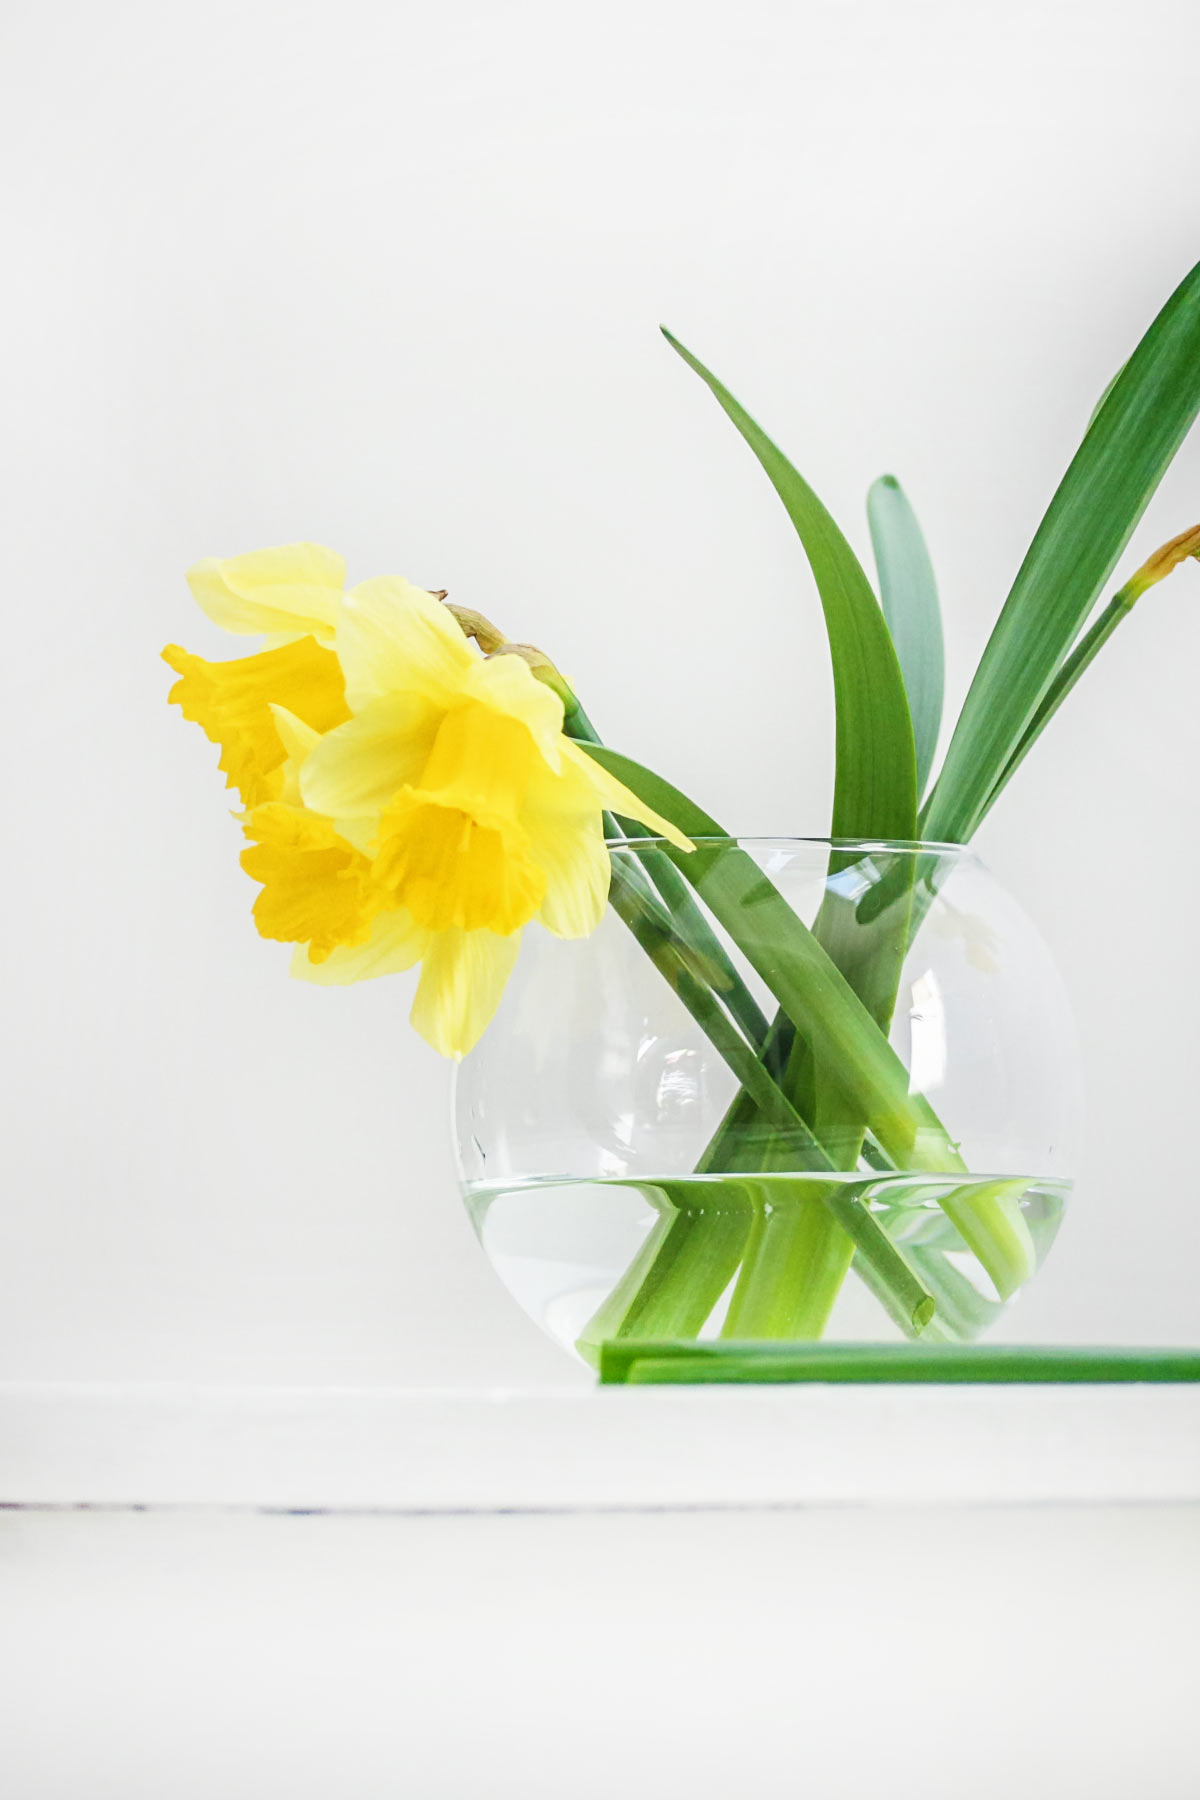 Daffodils in a vase.